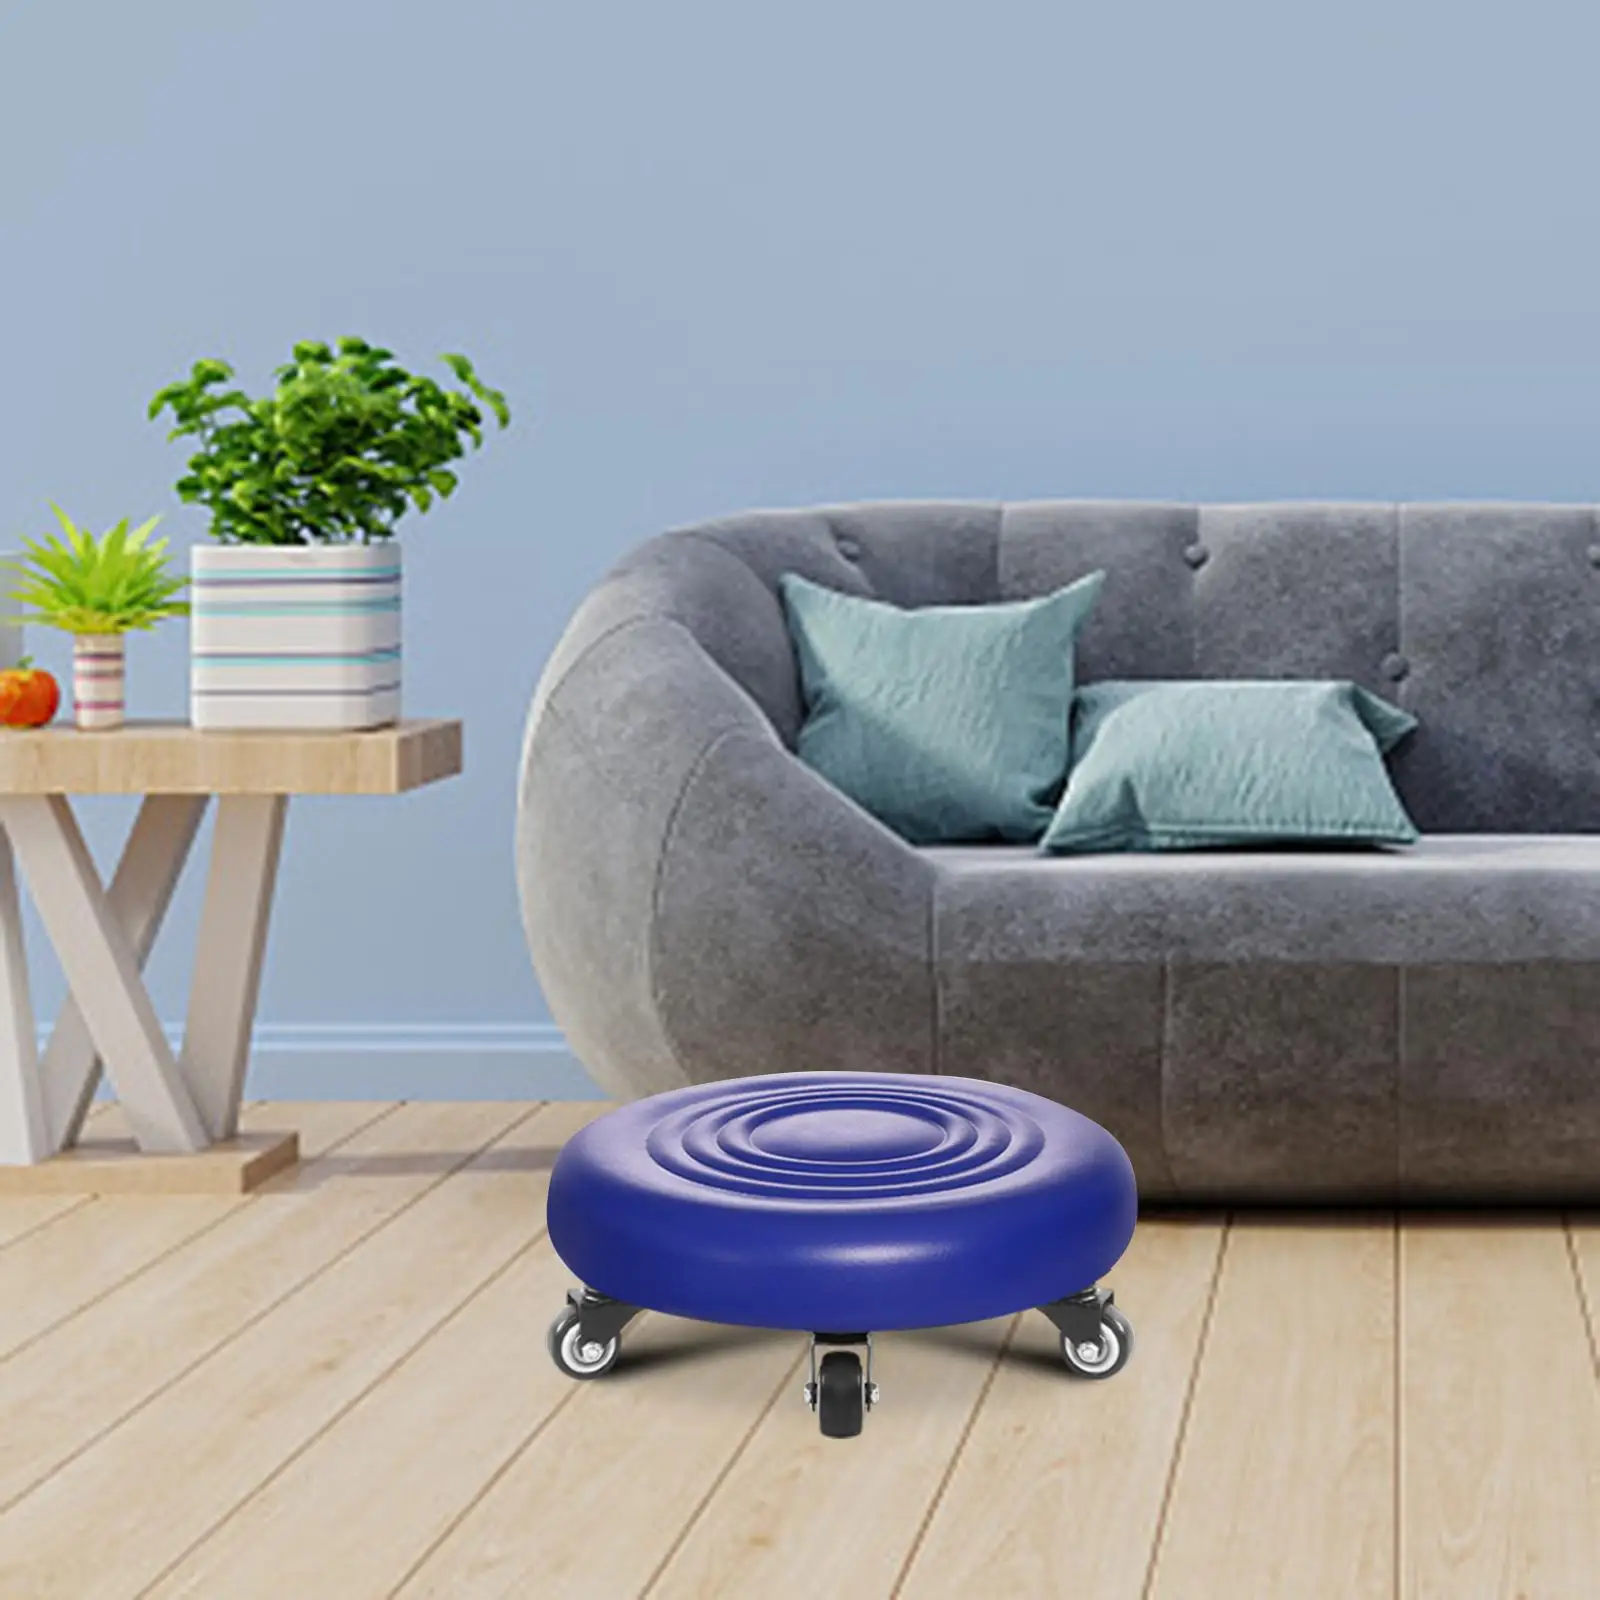 Round Low Roller Seat Stool Rolling Stool Comfortable Stool Pulley Ottoman Pulley Stool for Office Garden Home